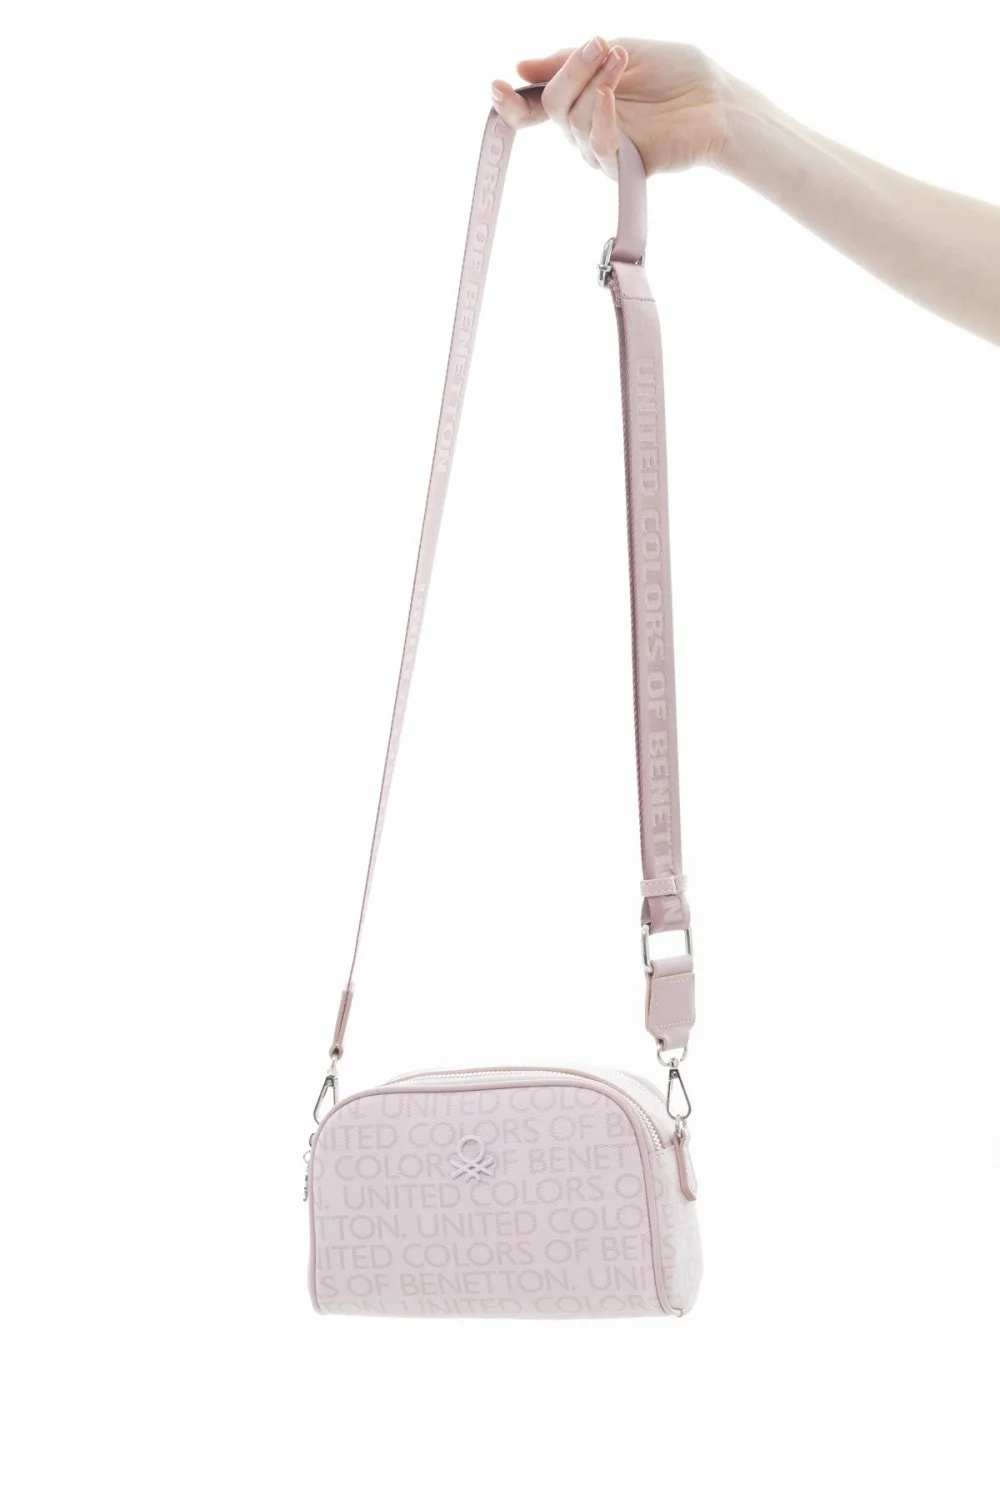 

United Colors of Benetton BNT_755 PINK Bag